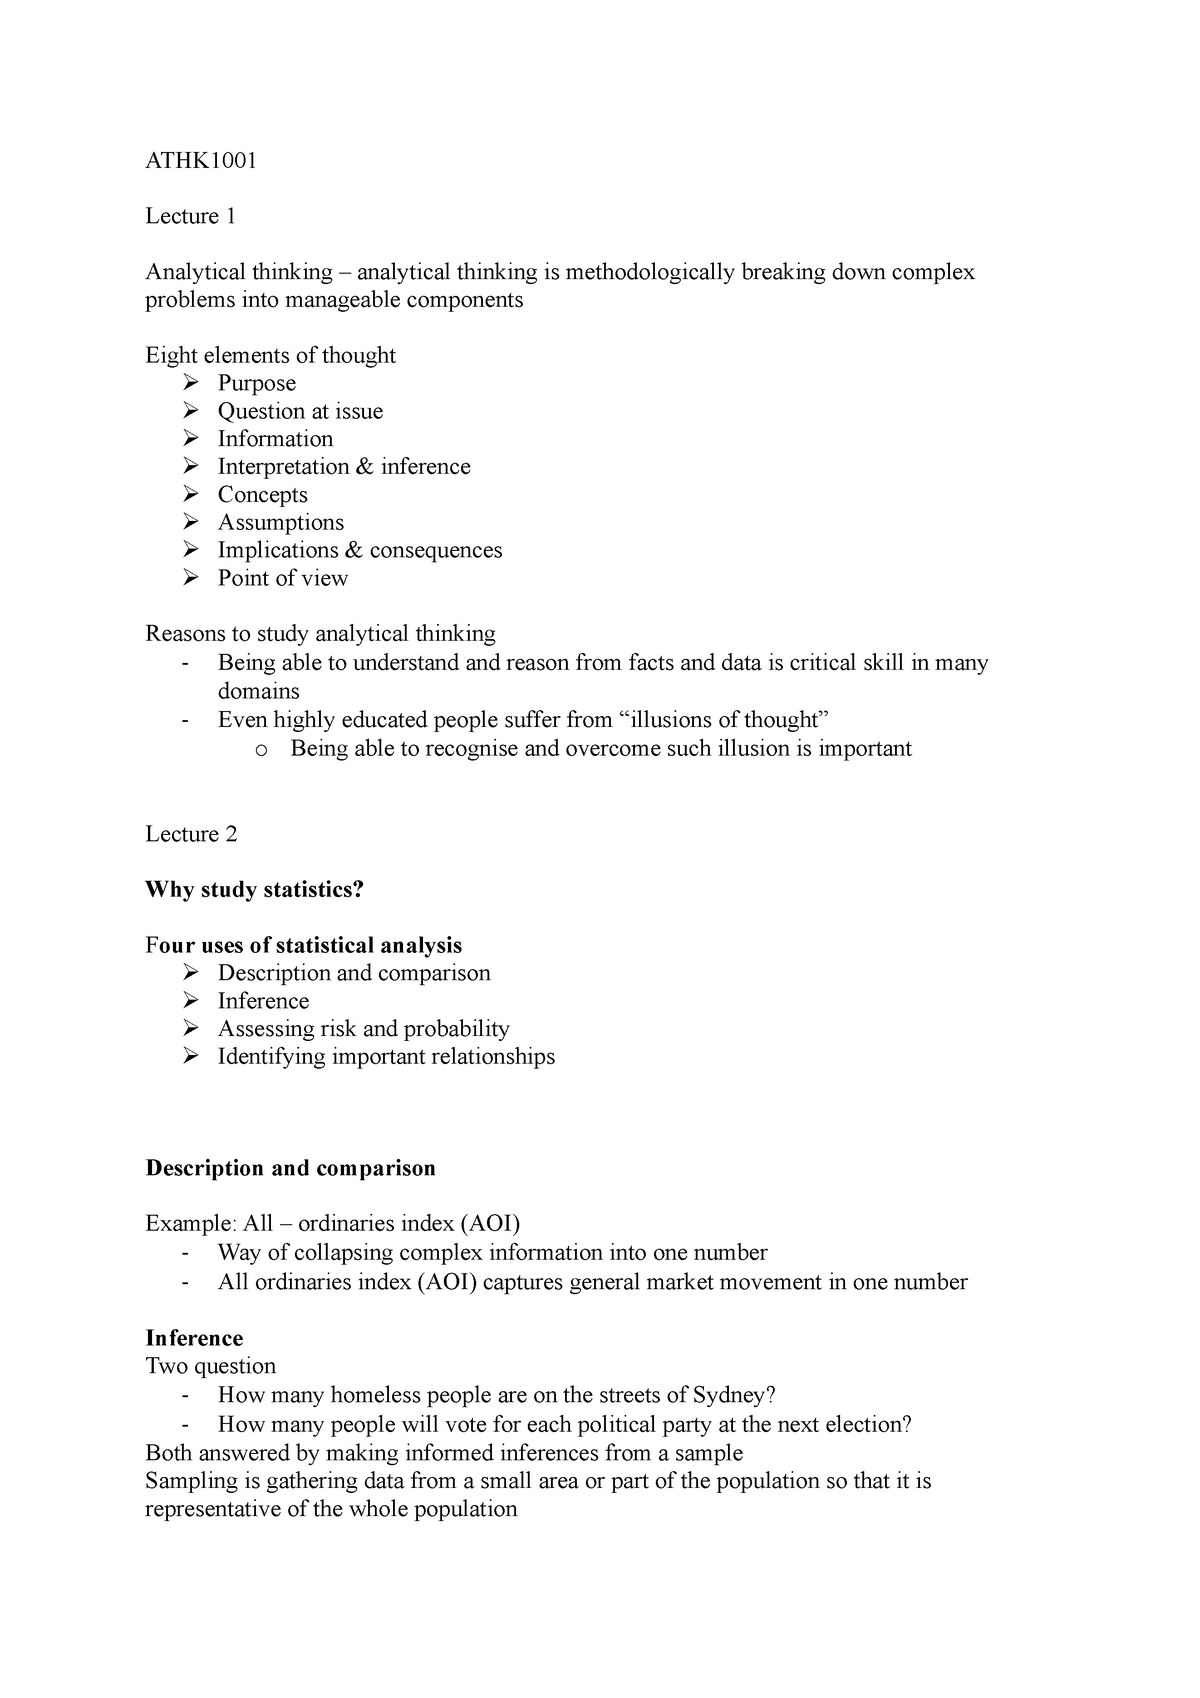 ATHK1001 - Lecture notes - ATHK Lecture 1 Analytical thinking ...